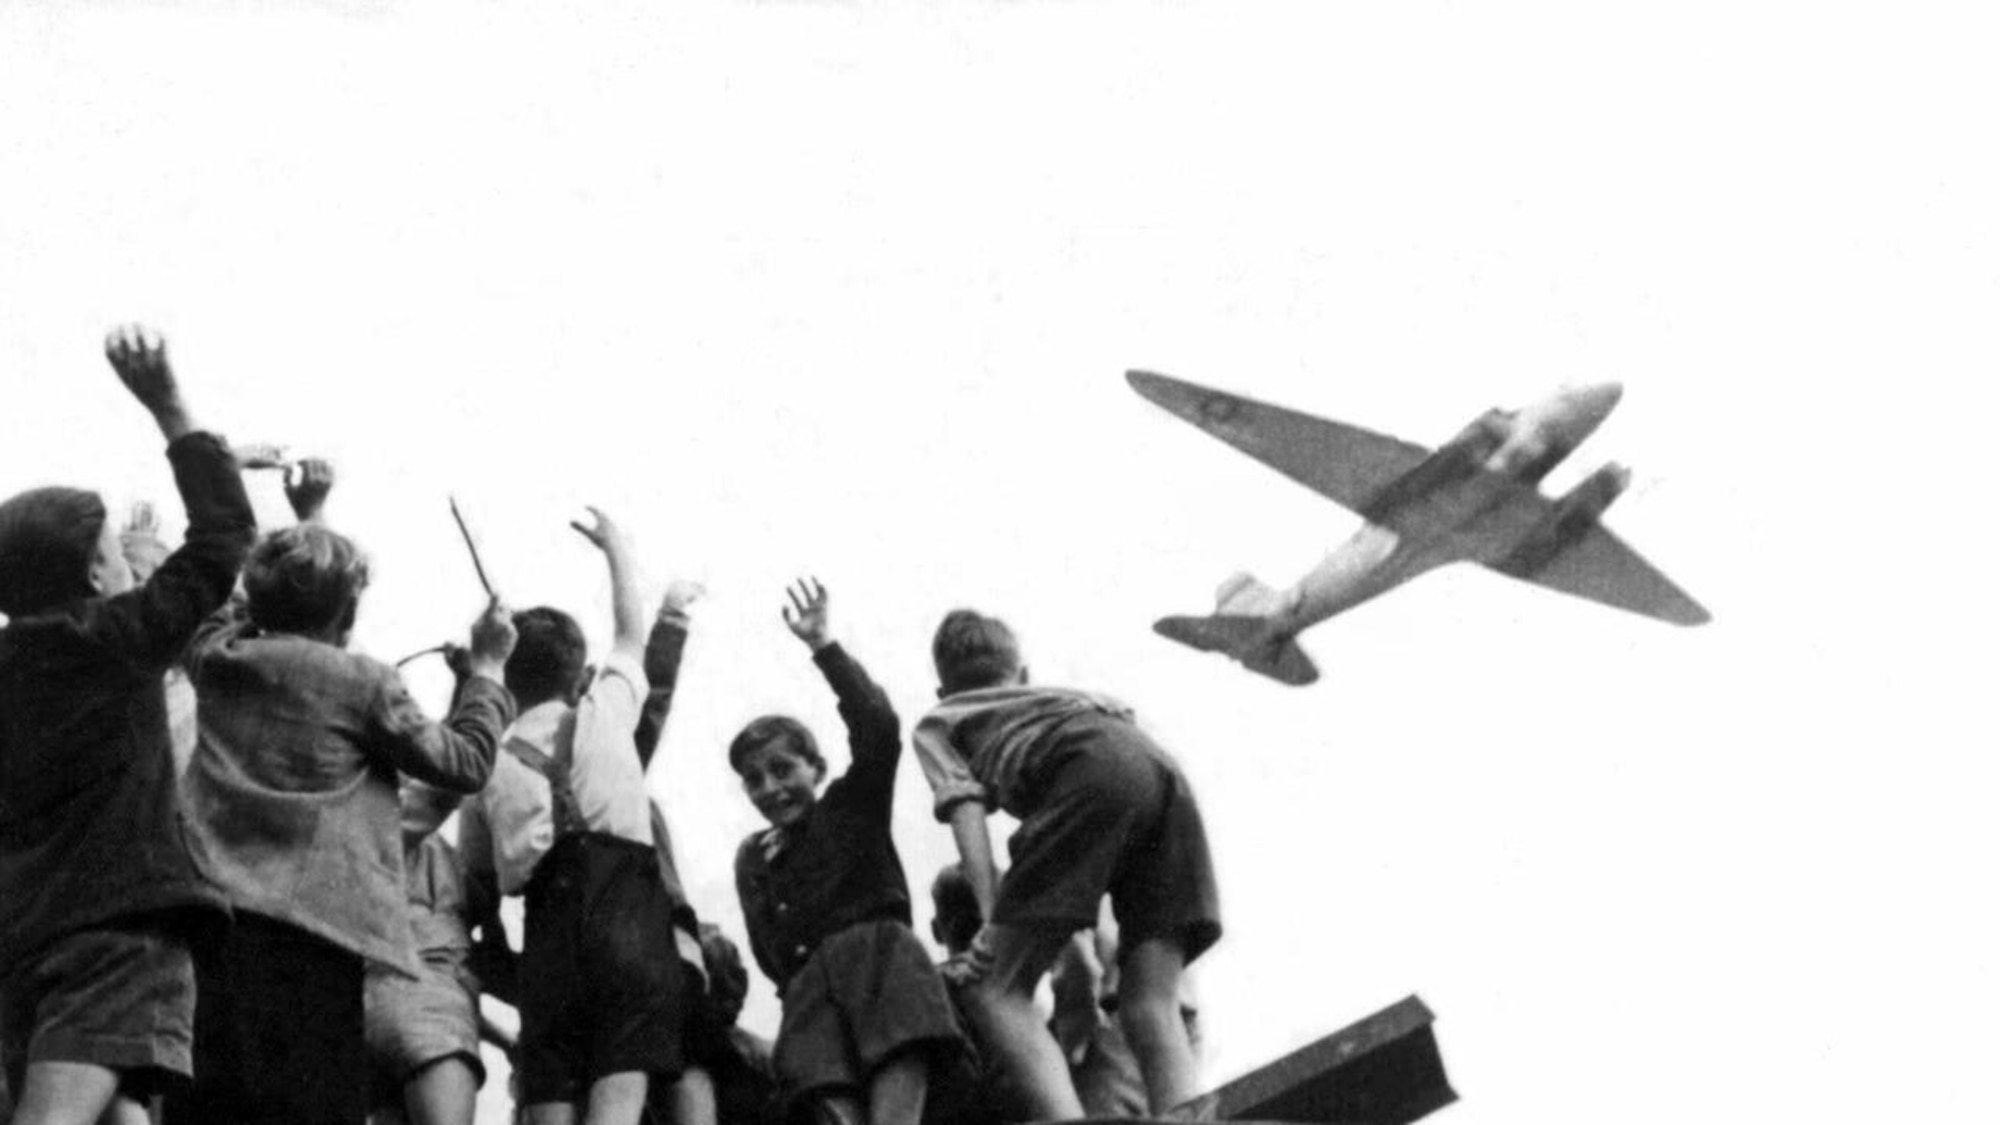 German children in West Berlin wave to an Air Force transport aircraft as it comes in to land at Templehof Airport during "Operation Vittles," better known as the Berlin Airlift in 1948. The USAF and United Kingdom Royal Air Force aircraft flew around the clock throughout the year and into 1949 when the Soviets reopened land routes on May 12. (U.S. Air Force photo)